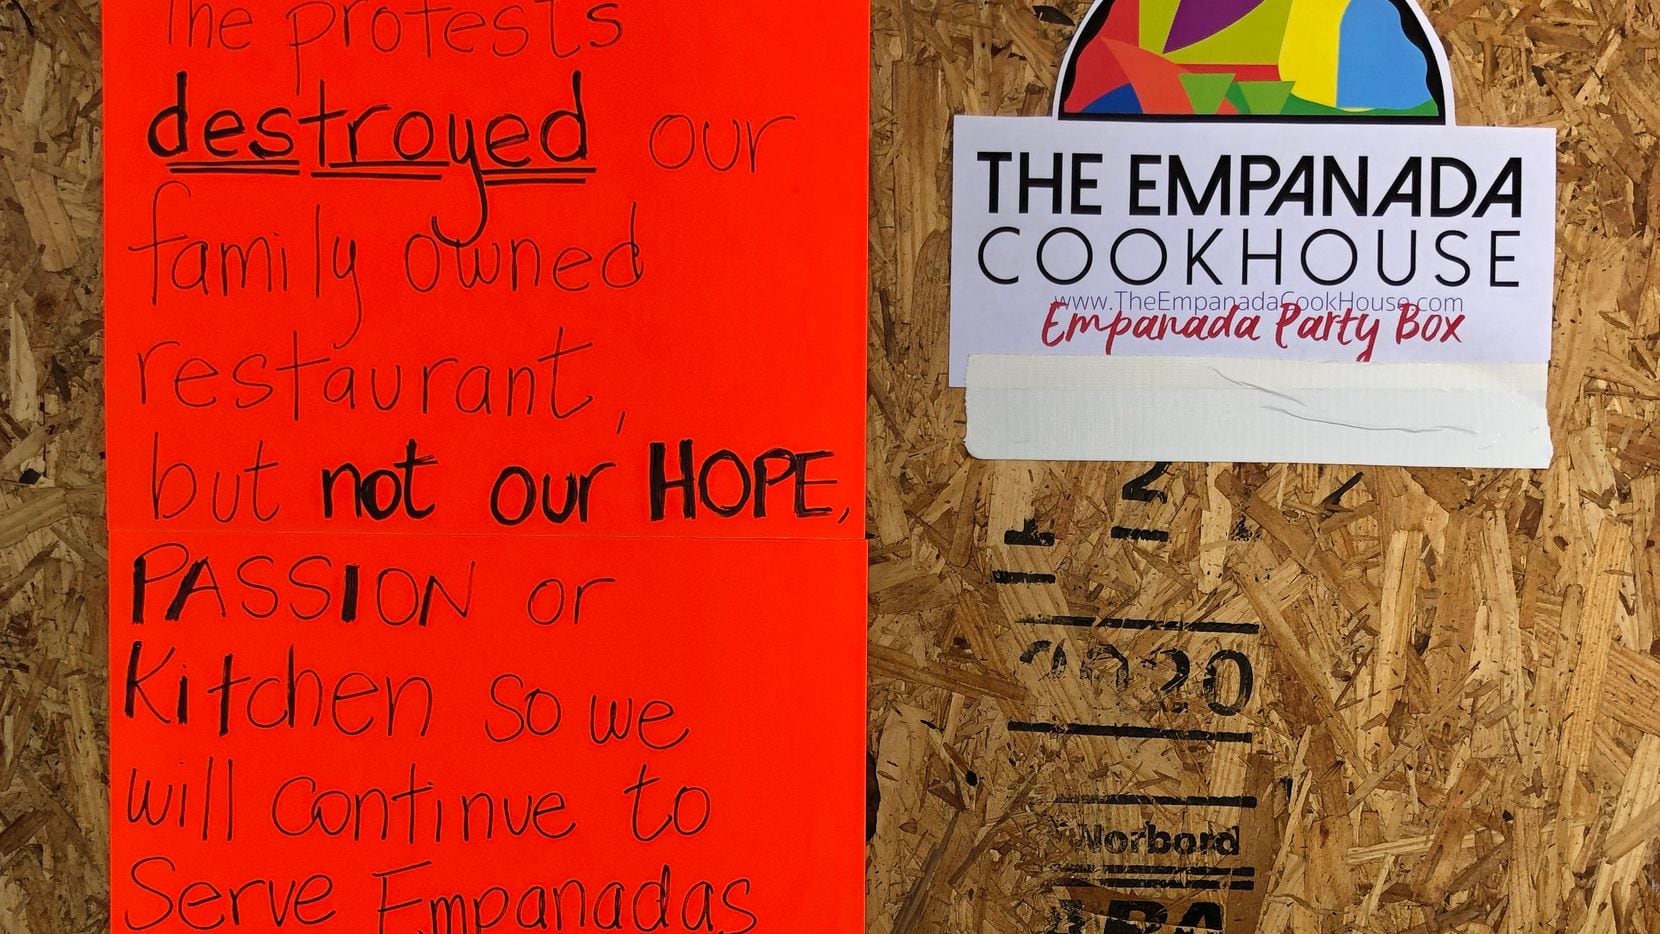 A sign on the boarded up door of Empanada Cookhouse in Downtown Dallas